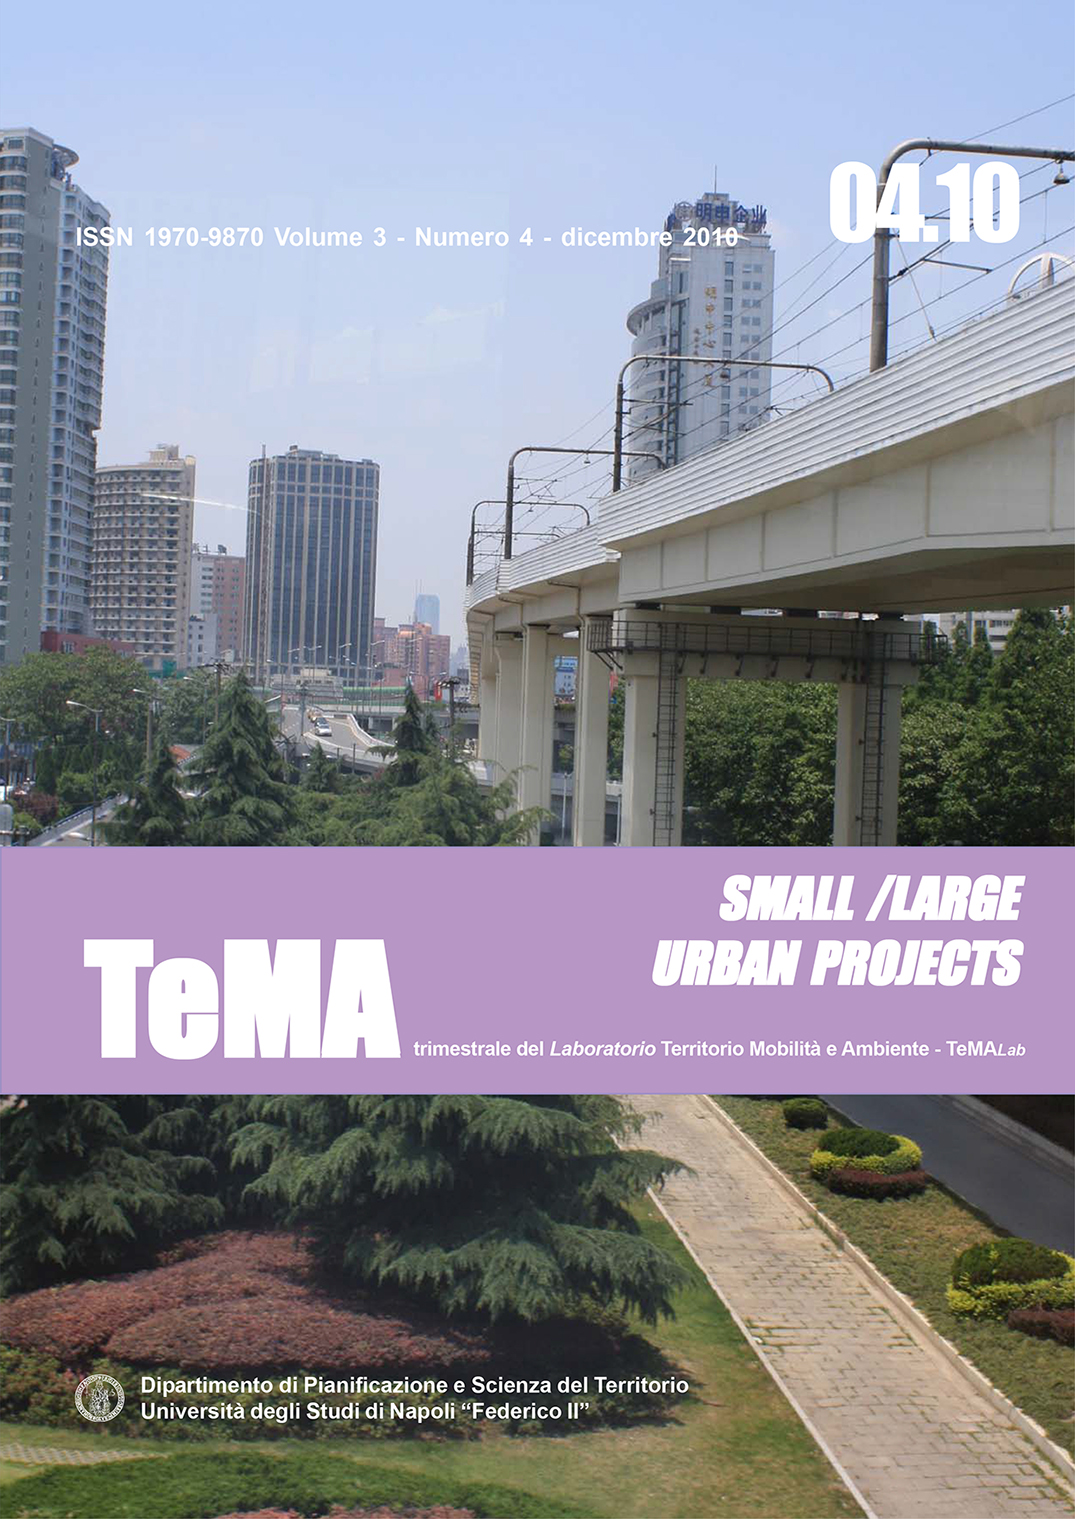 13_Vol 3, N° 4 (2010): Small/Large Urban Projects